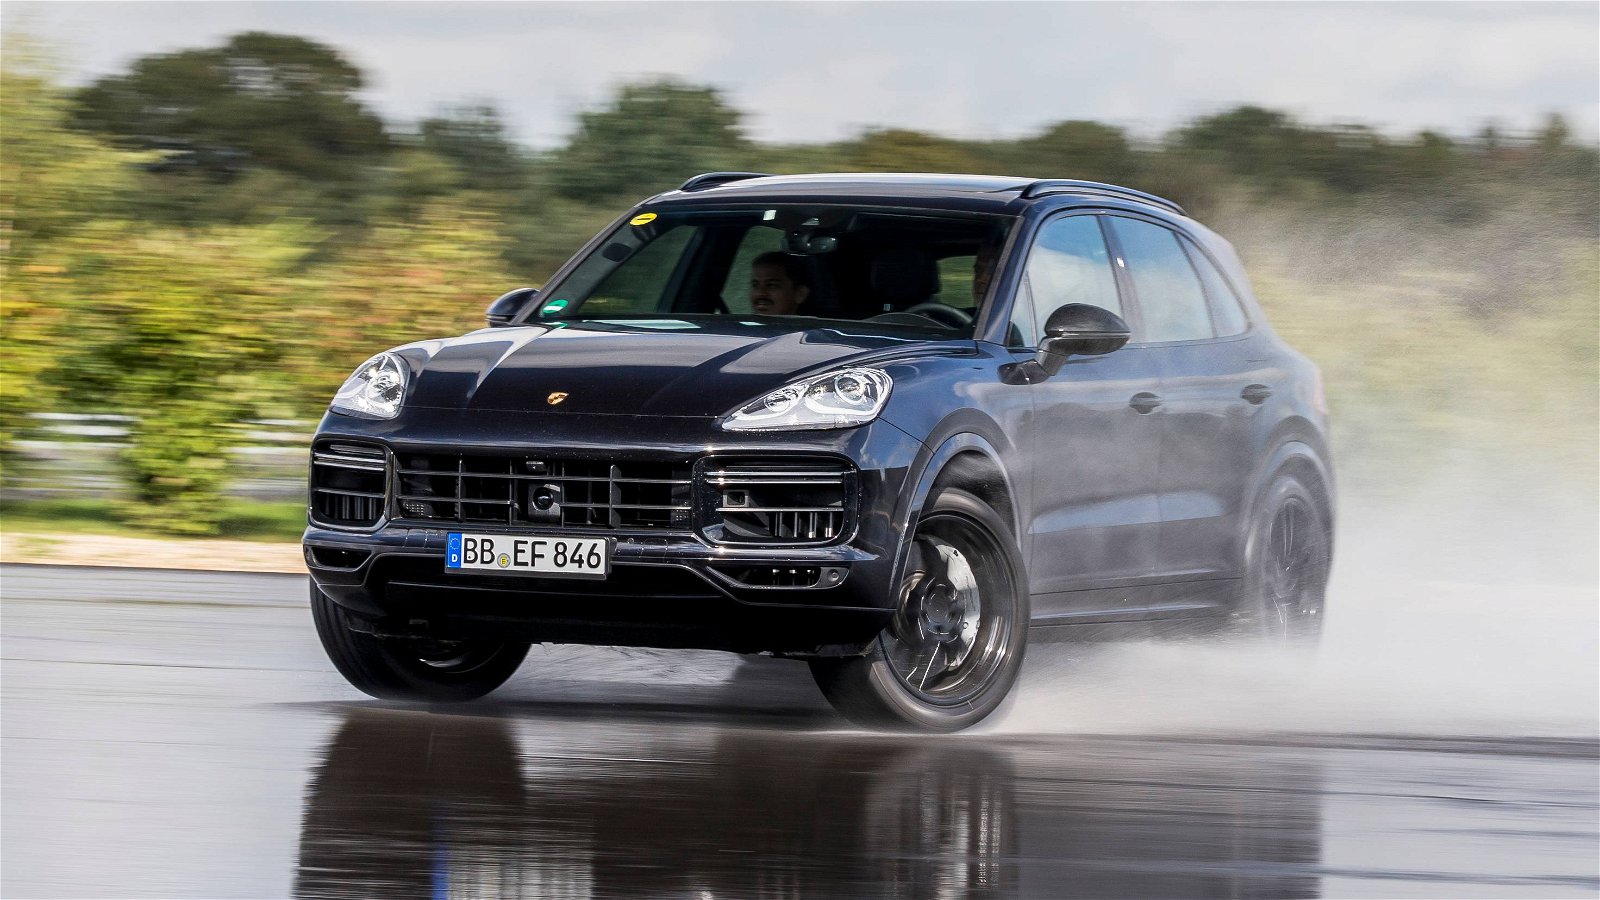 2018-Porsche-Cayenne-on-and-off-road-driving-0-9064